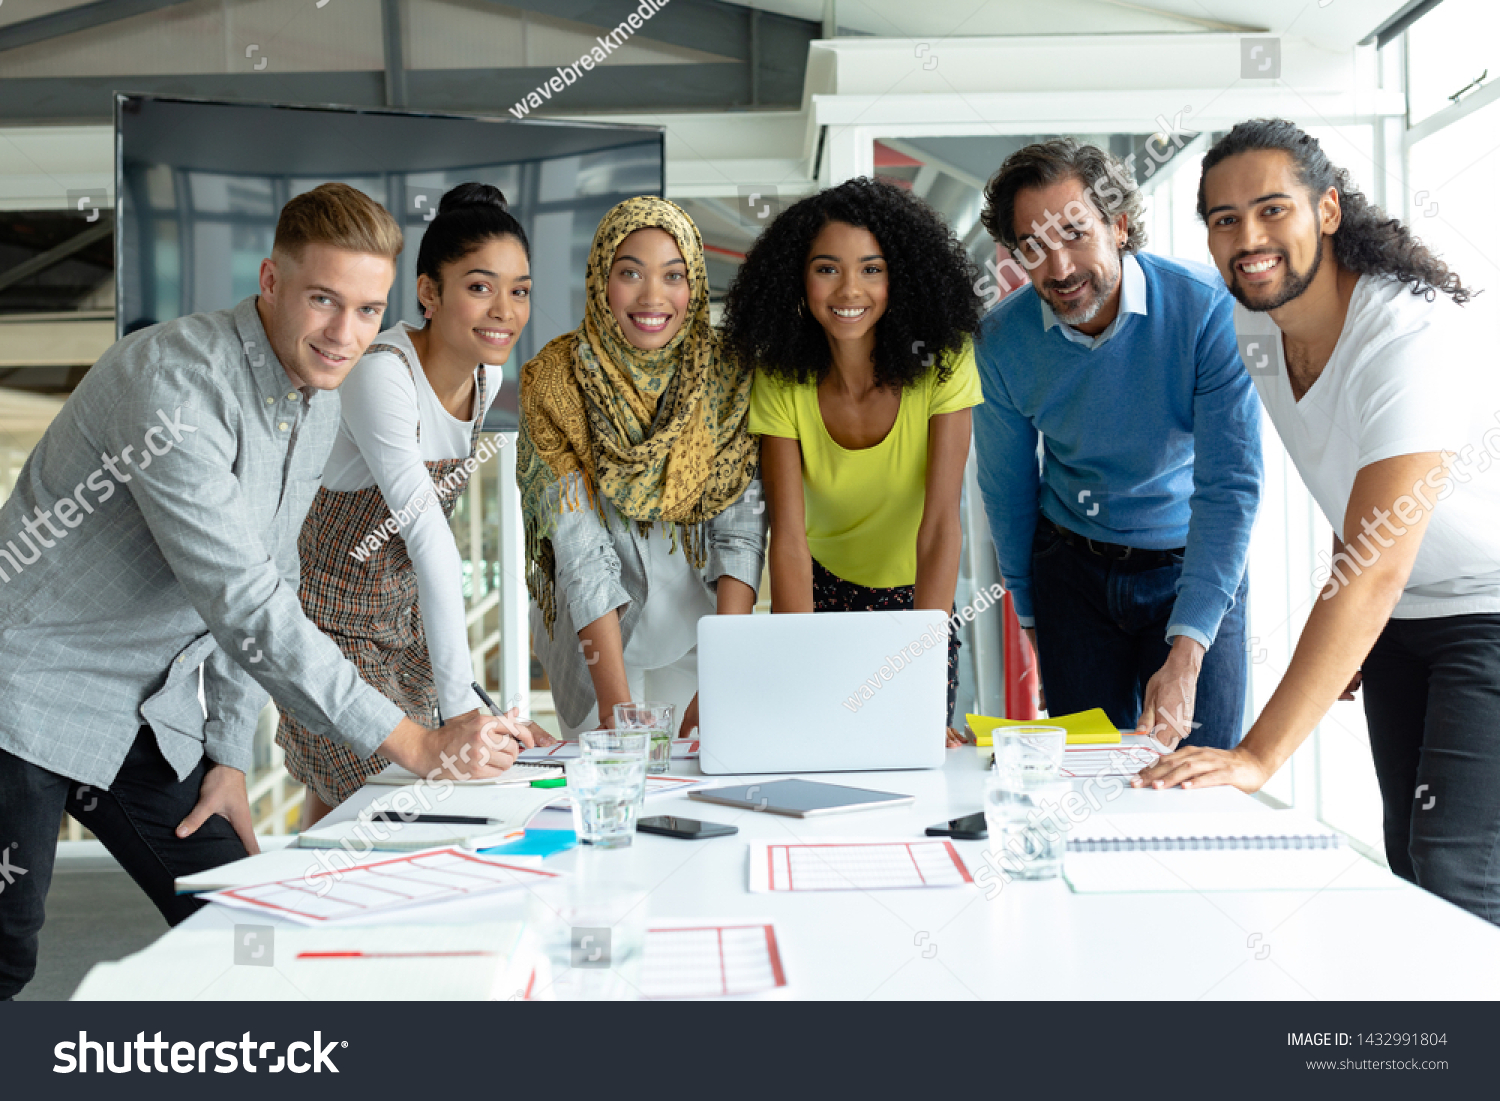 Front view of diverse business people looking at camera while working together at conference room in a modern office #1432991804